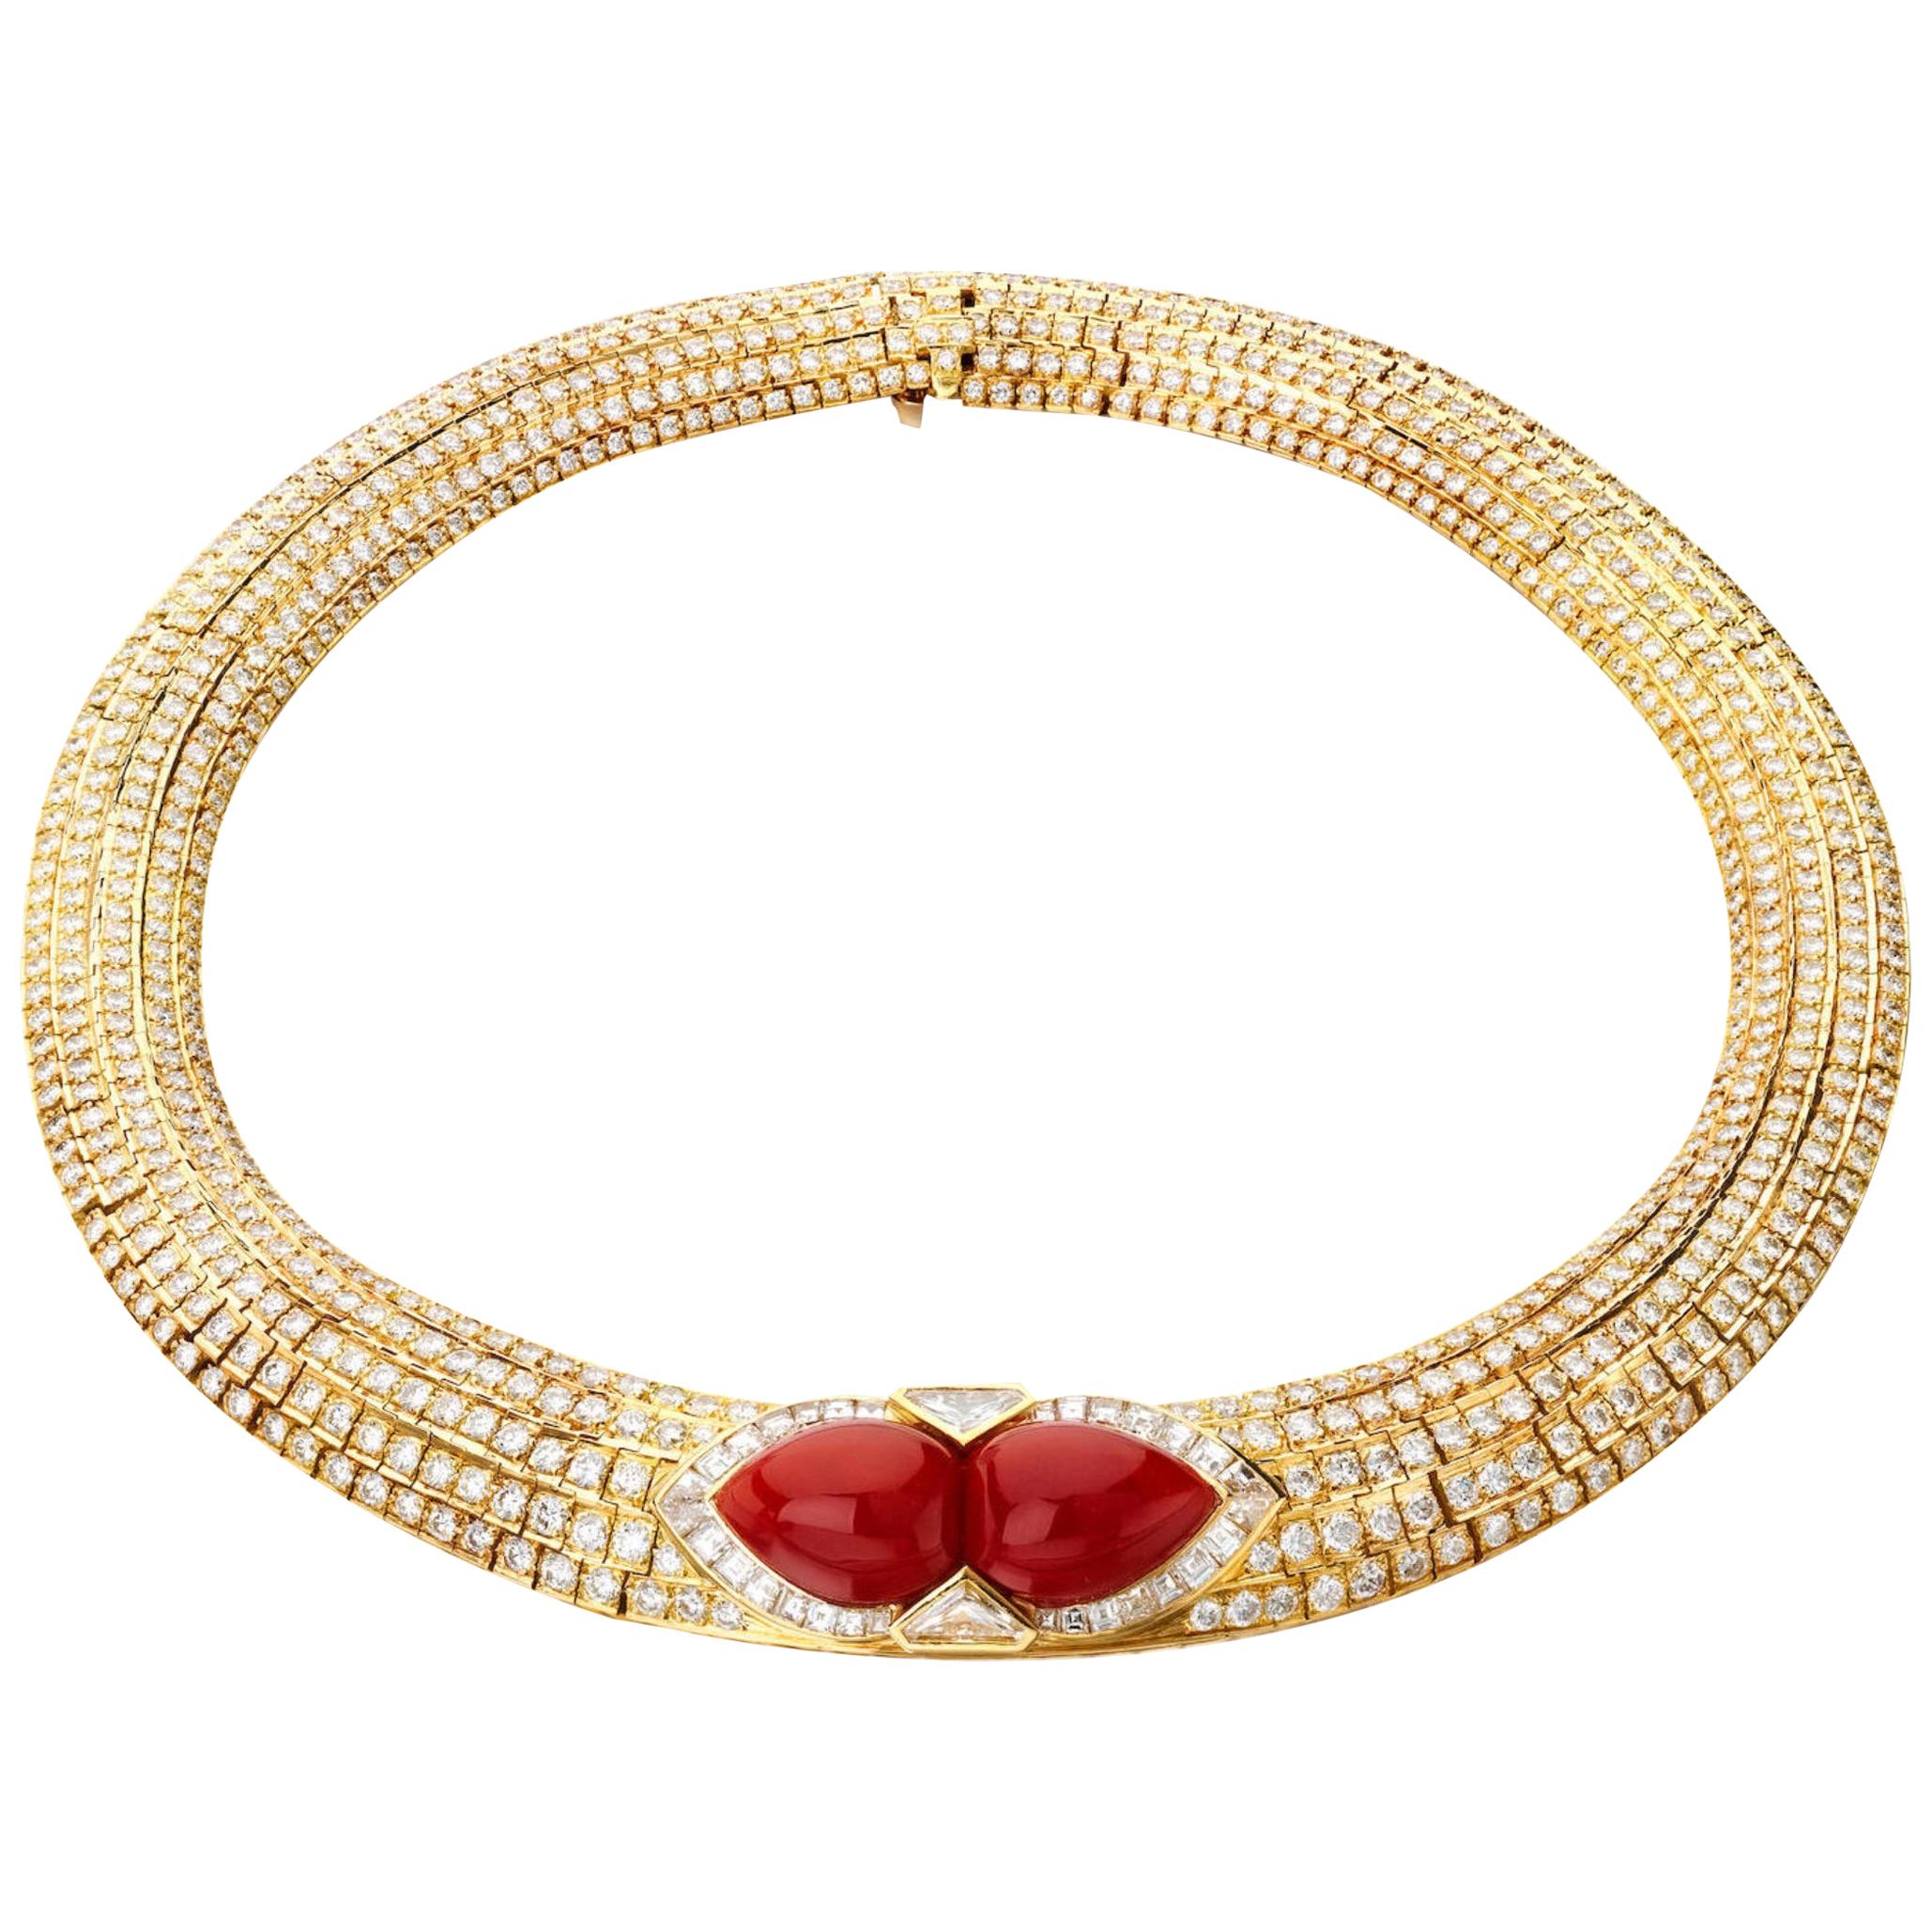 Coral and Diamond Necklace, Tabbah